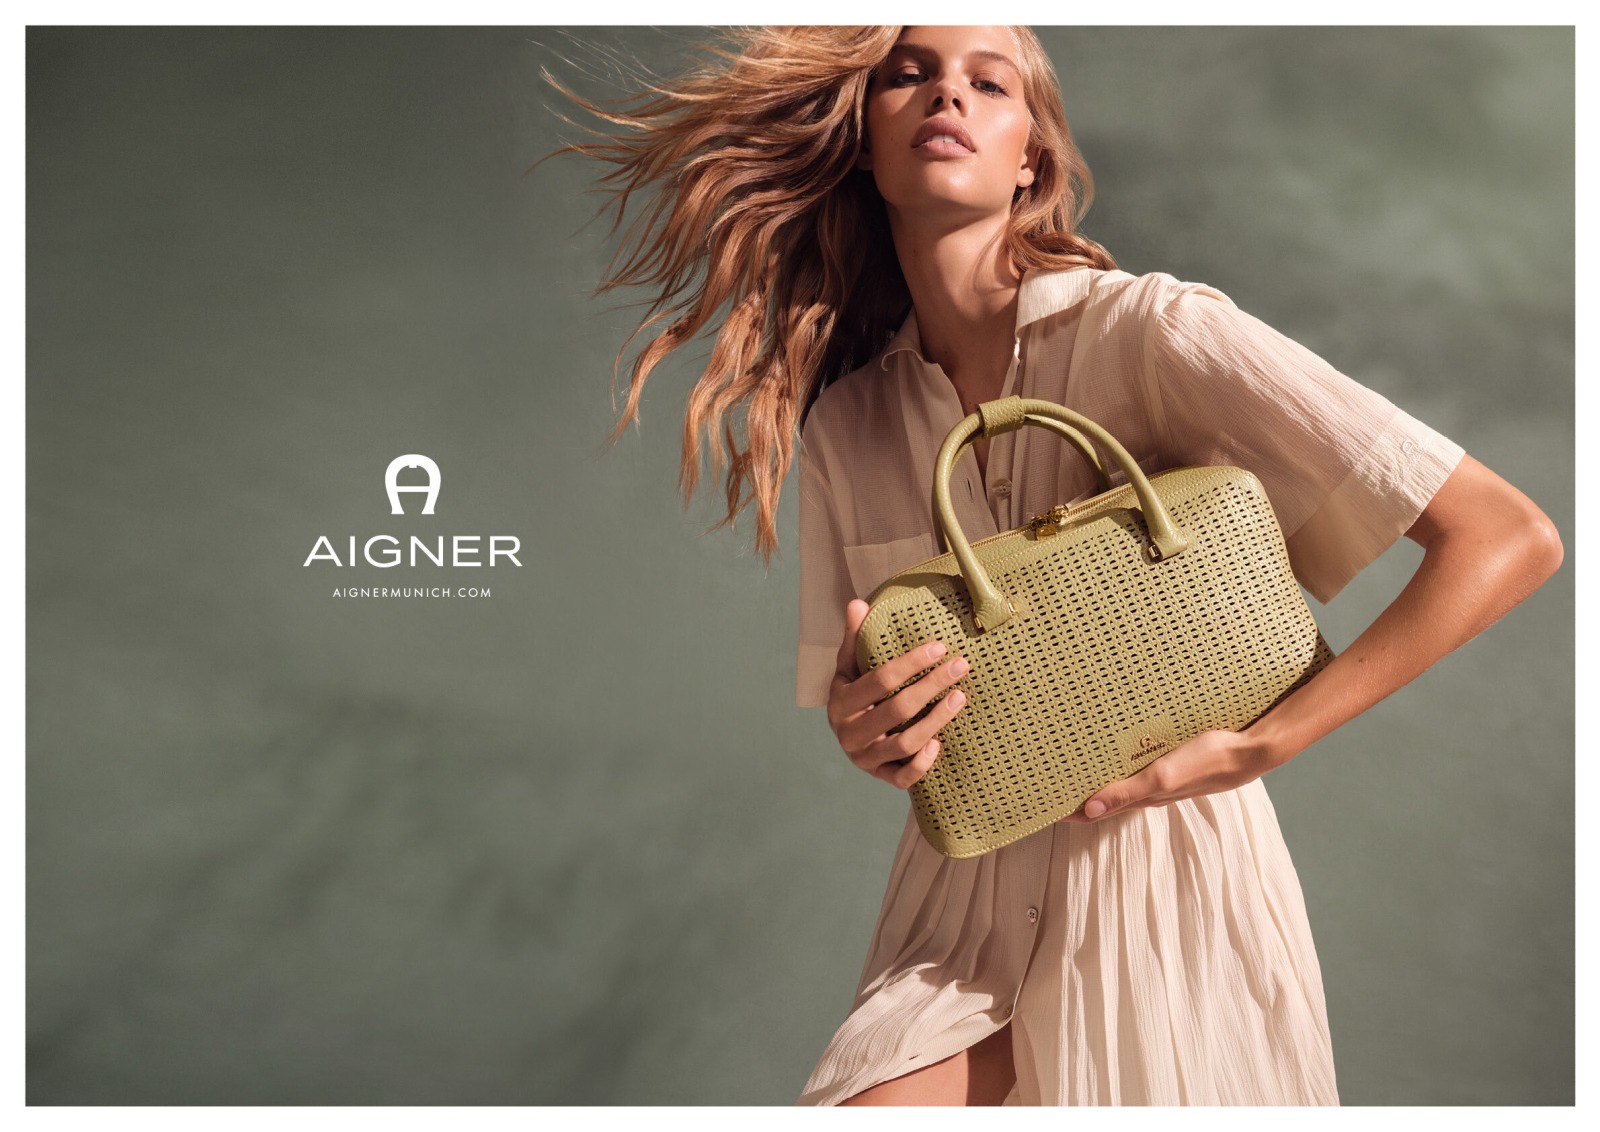 AIGNER 6 by Andreas ORTNER